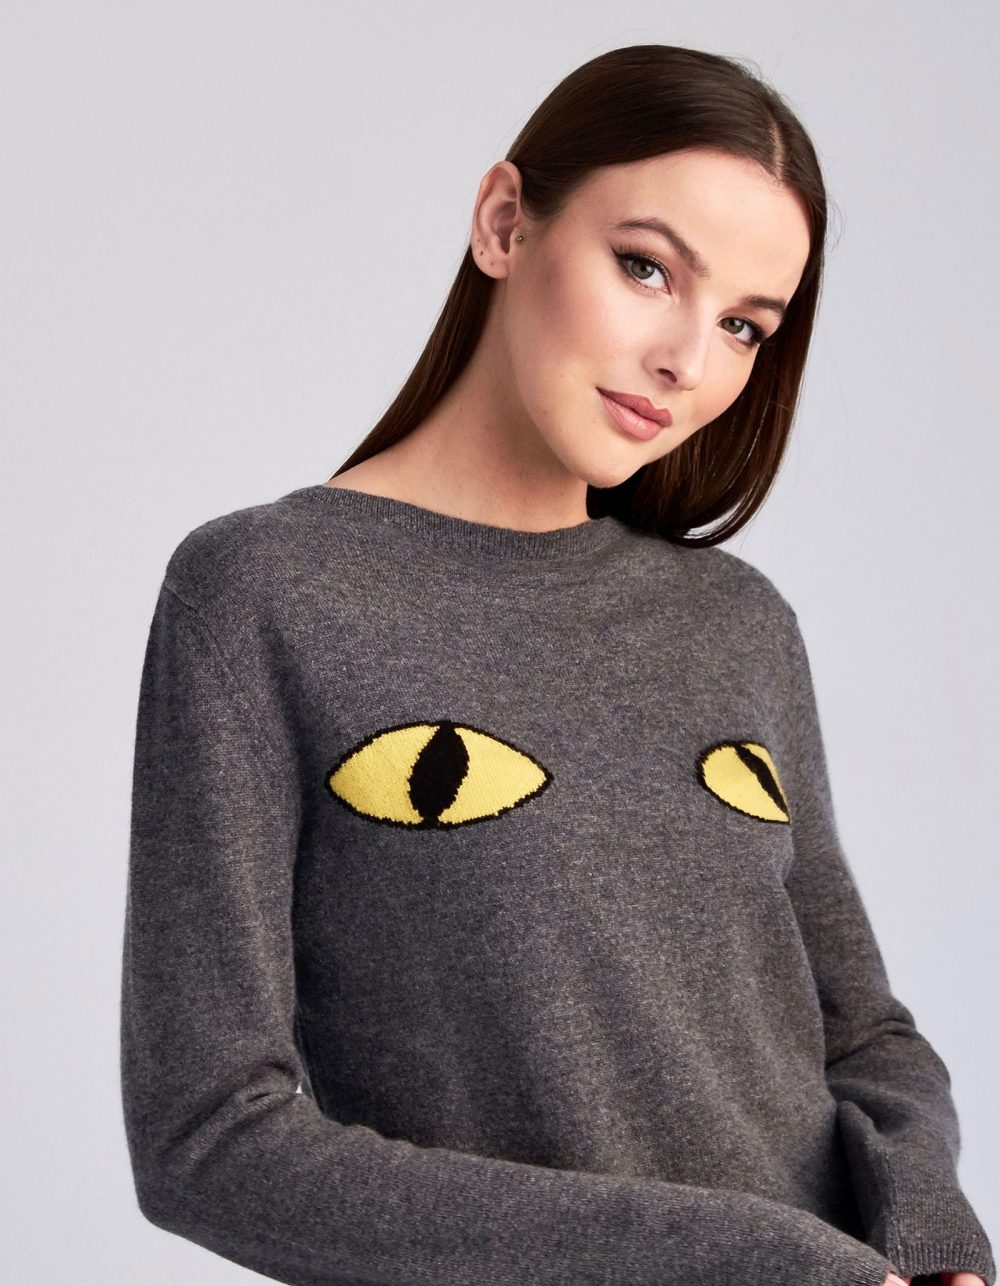 A woman modelling Cat Eyes womens cashmere jumpers, part of the designer cashmere knitwear collection at malin darlin.